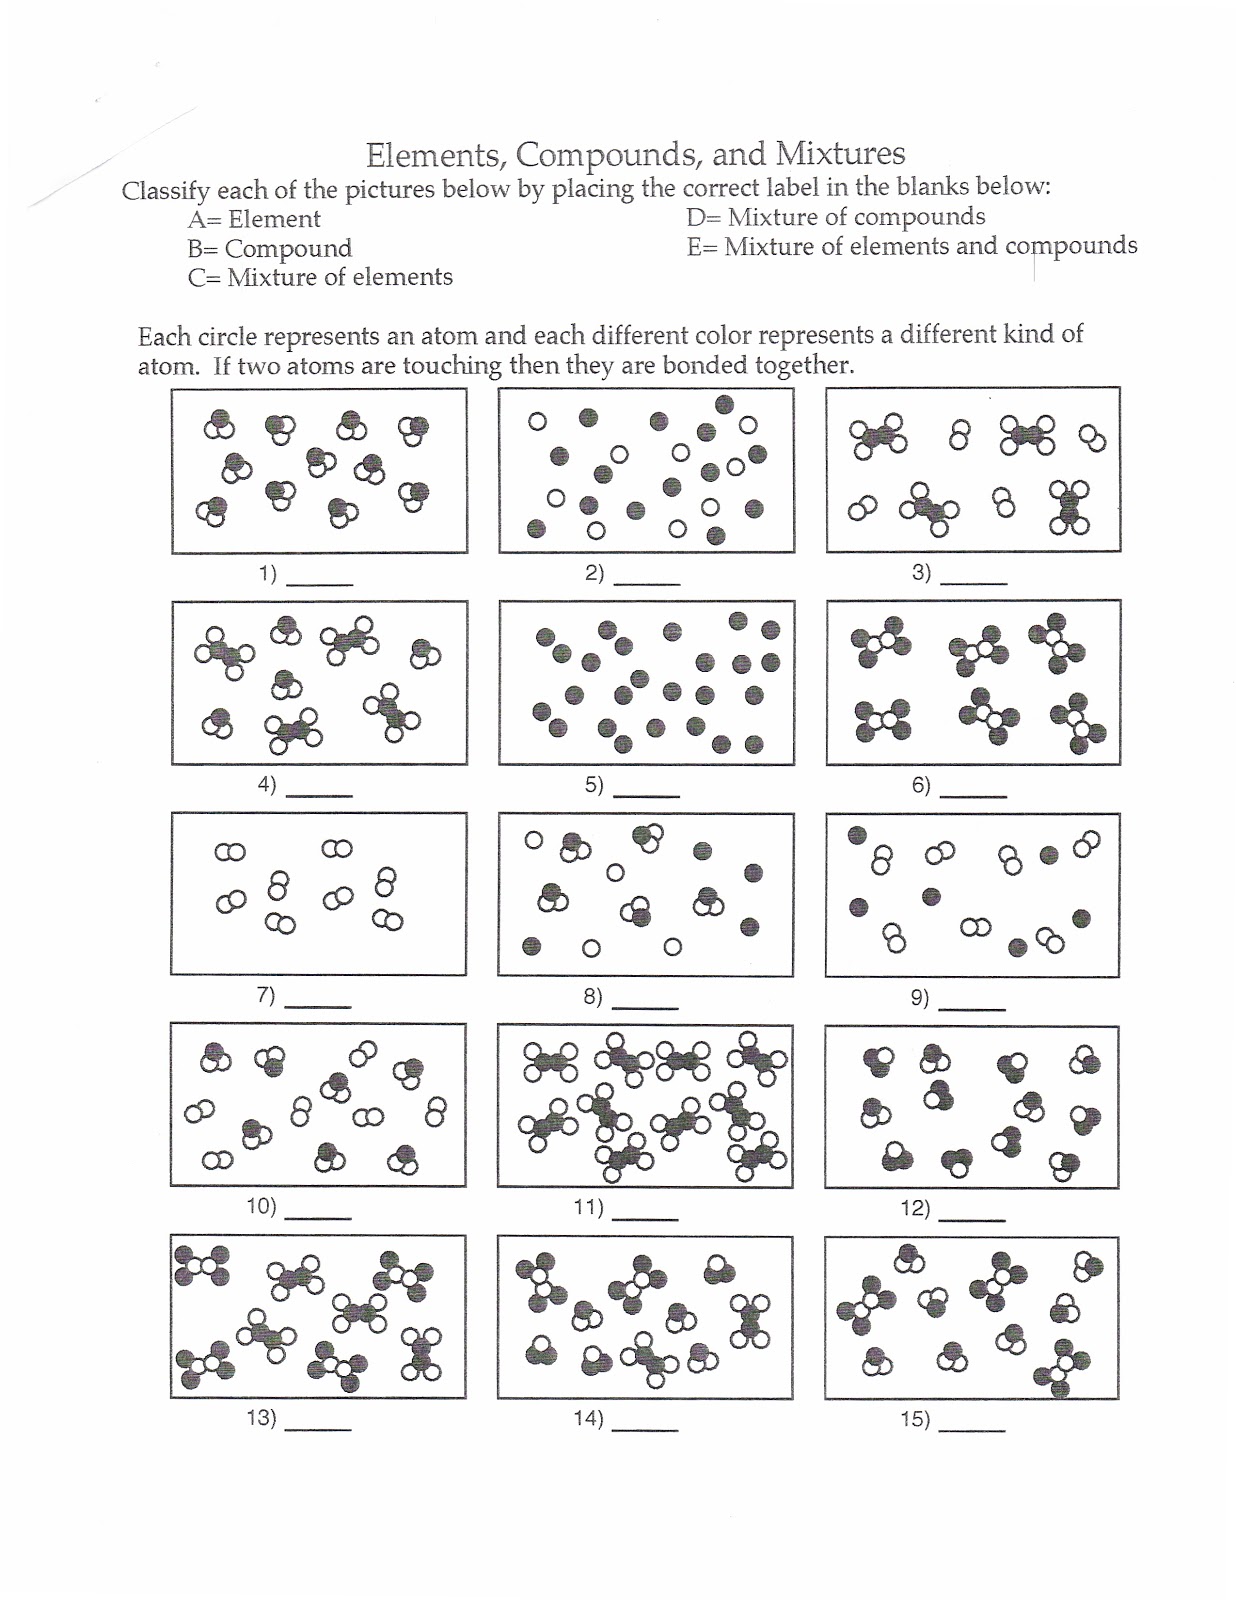 Elements Compounds And Mixtures Worksheet Answers